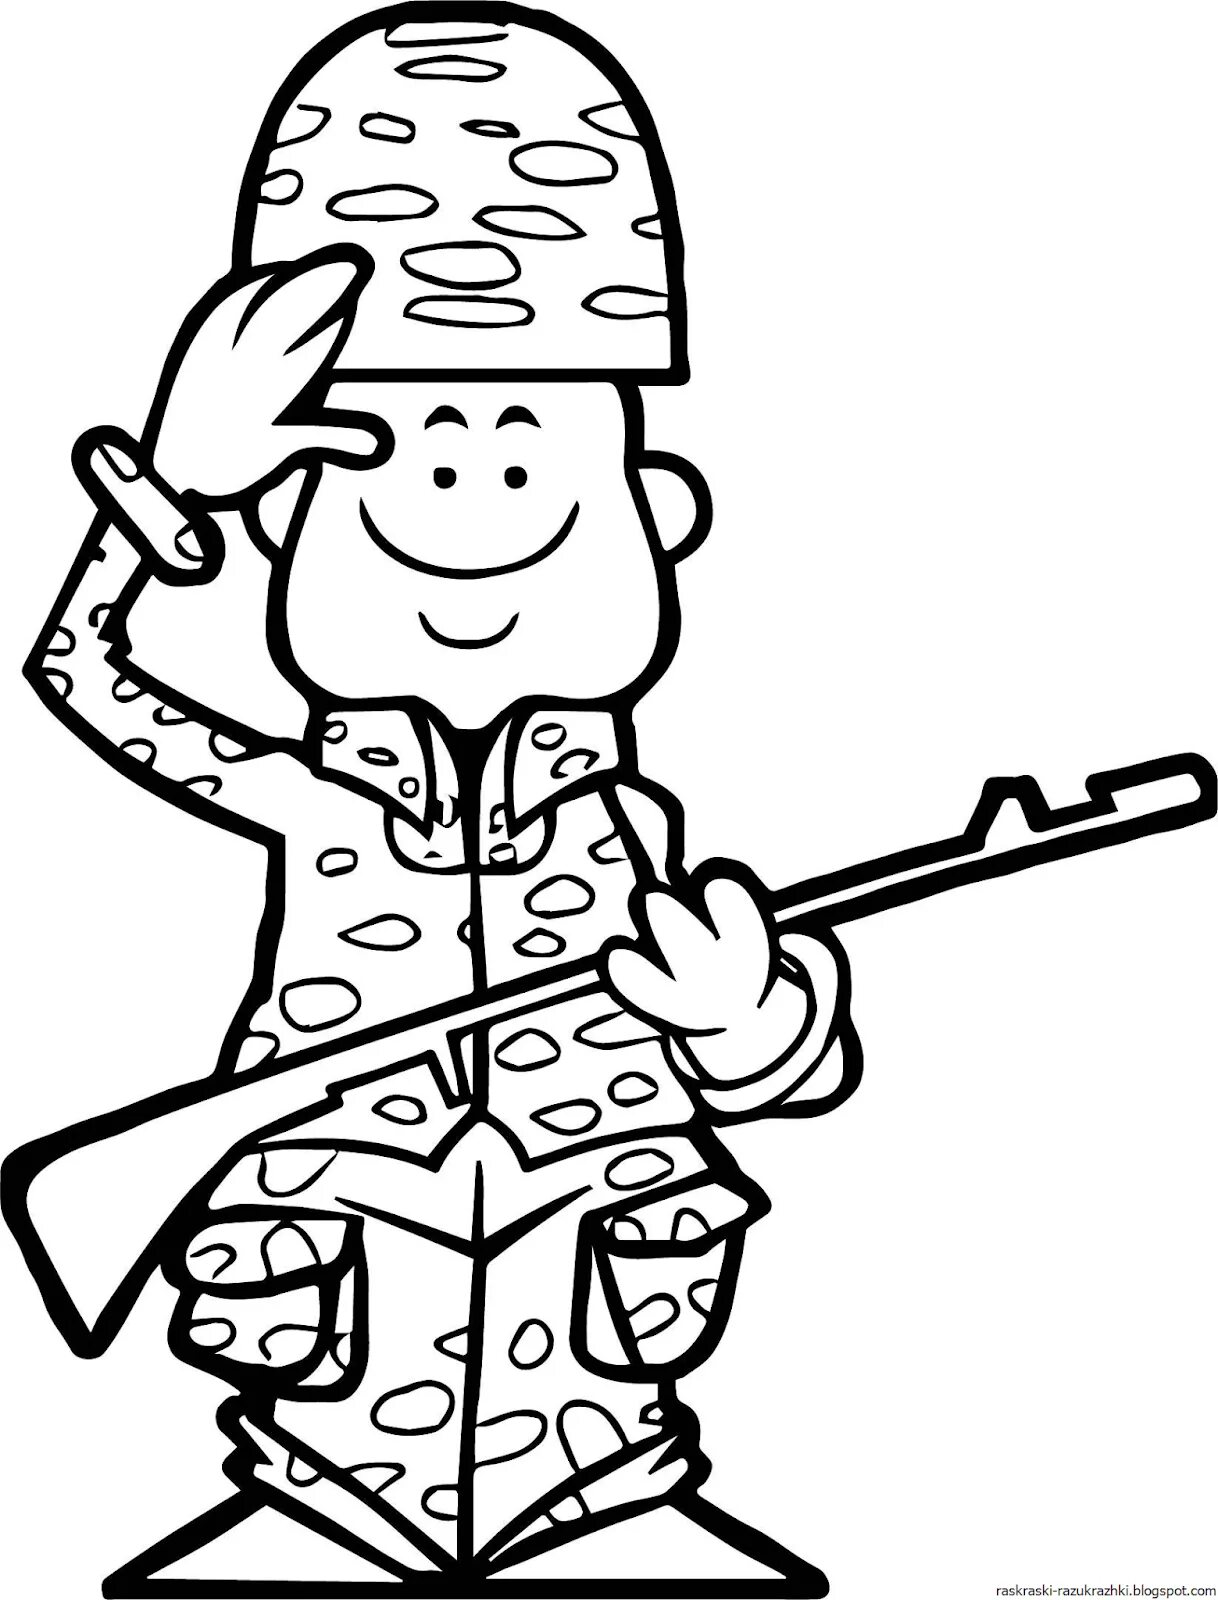 Soldier drawing for kids #7